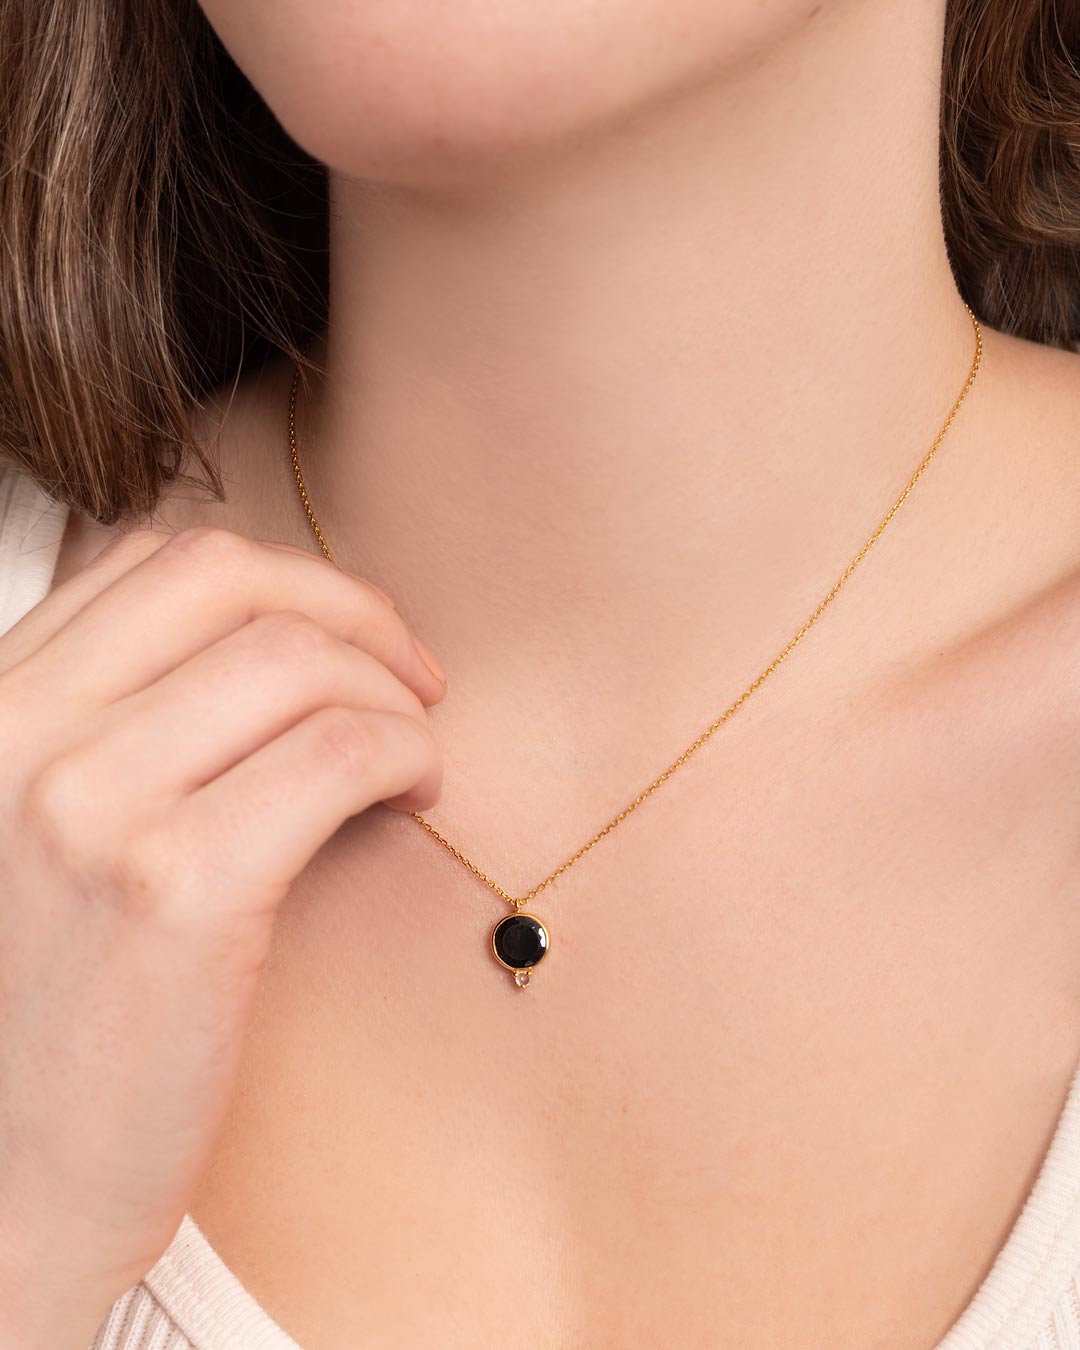 925 SILVER GOLD PLATED BLACK ONYX NECKLACE